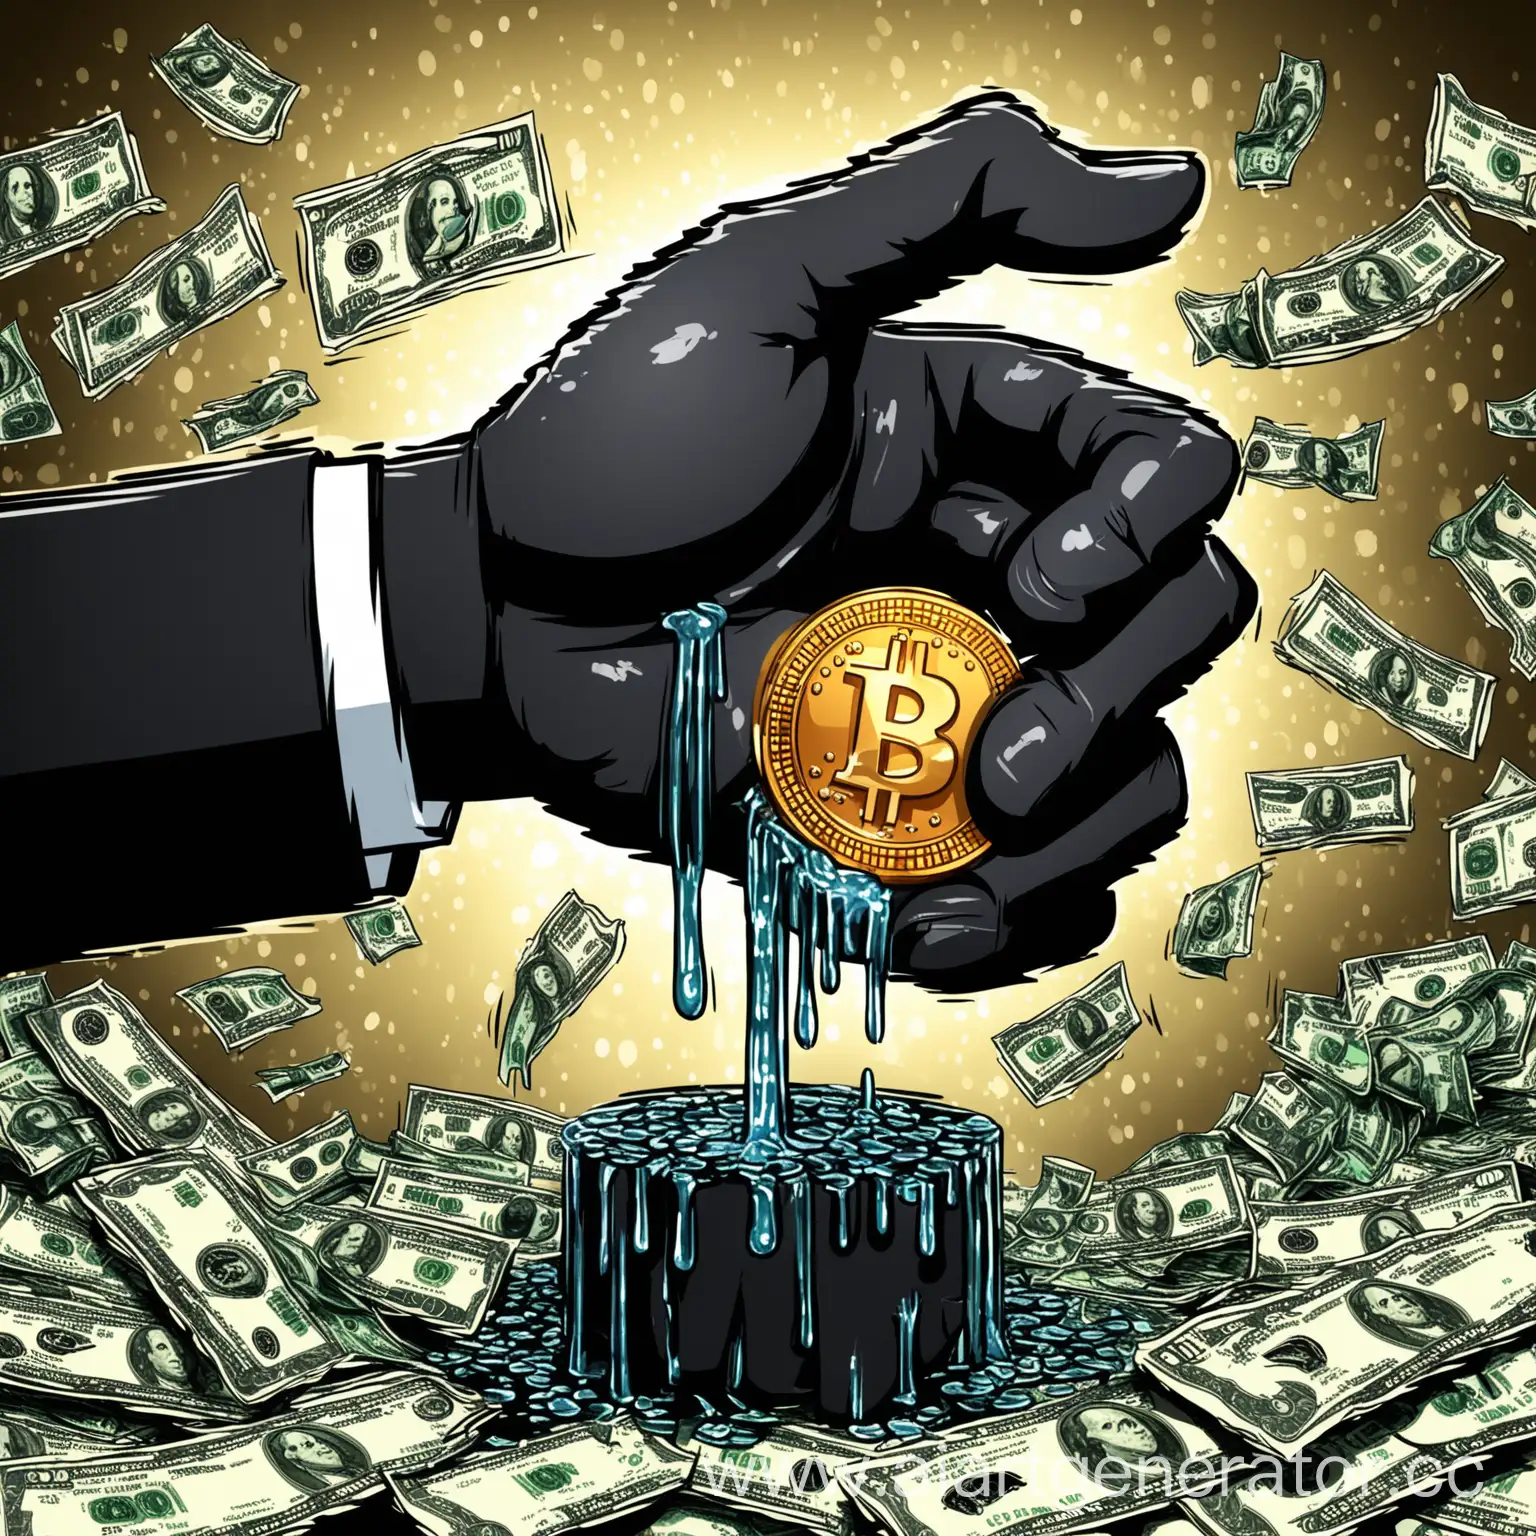 Create an avatar featuring a capitalist strong hand   he squeezing a Black Bitcoin, with dollars dripping from it. The hand and black should be the central element, and the background should be neutral to keep the focus on the main object. The style should be modern and vibrant